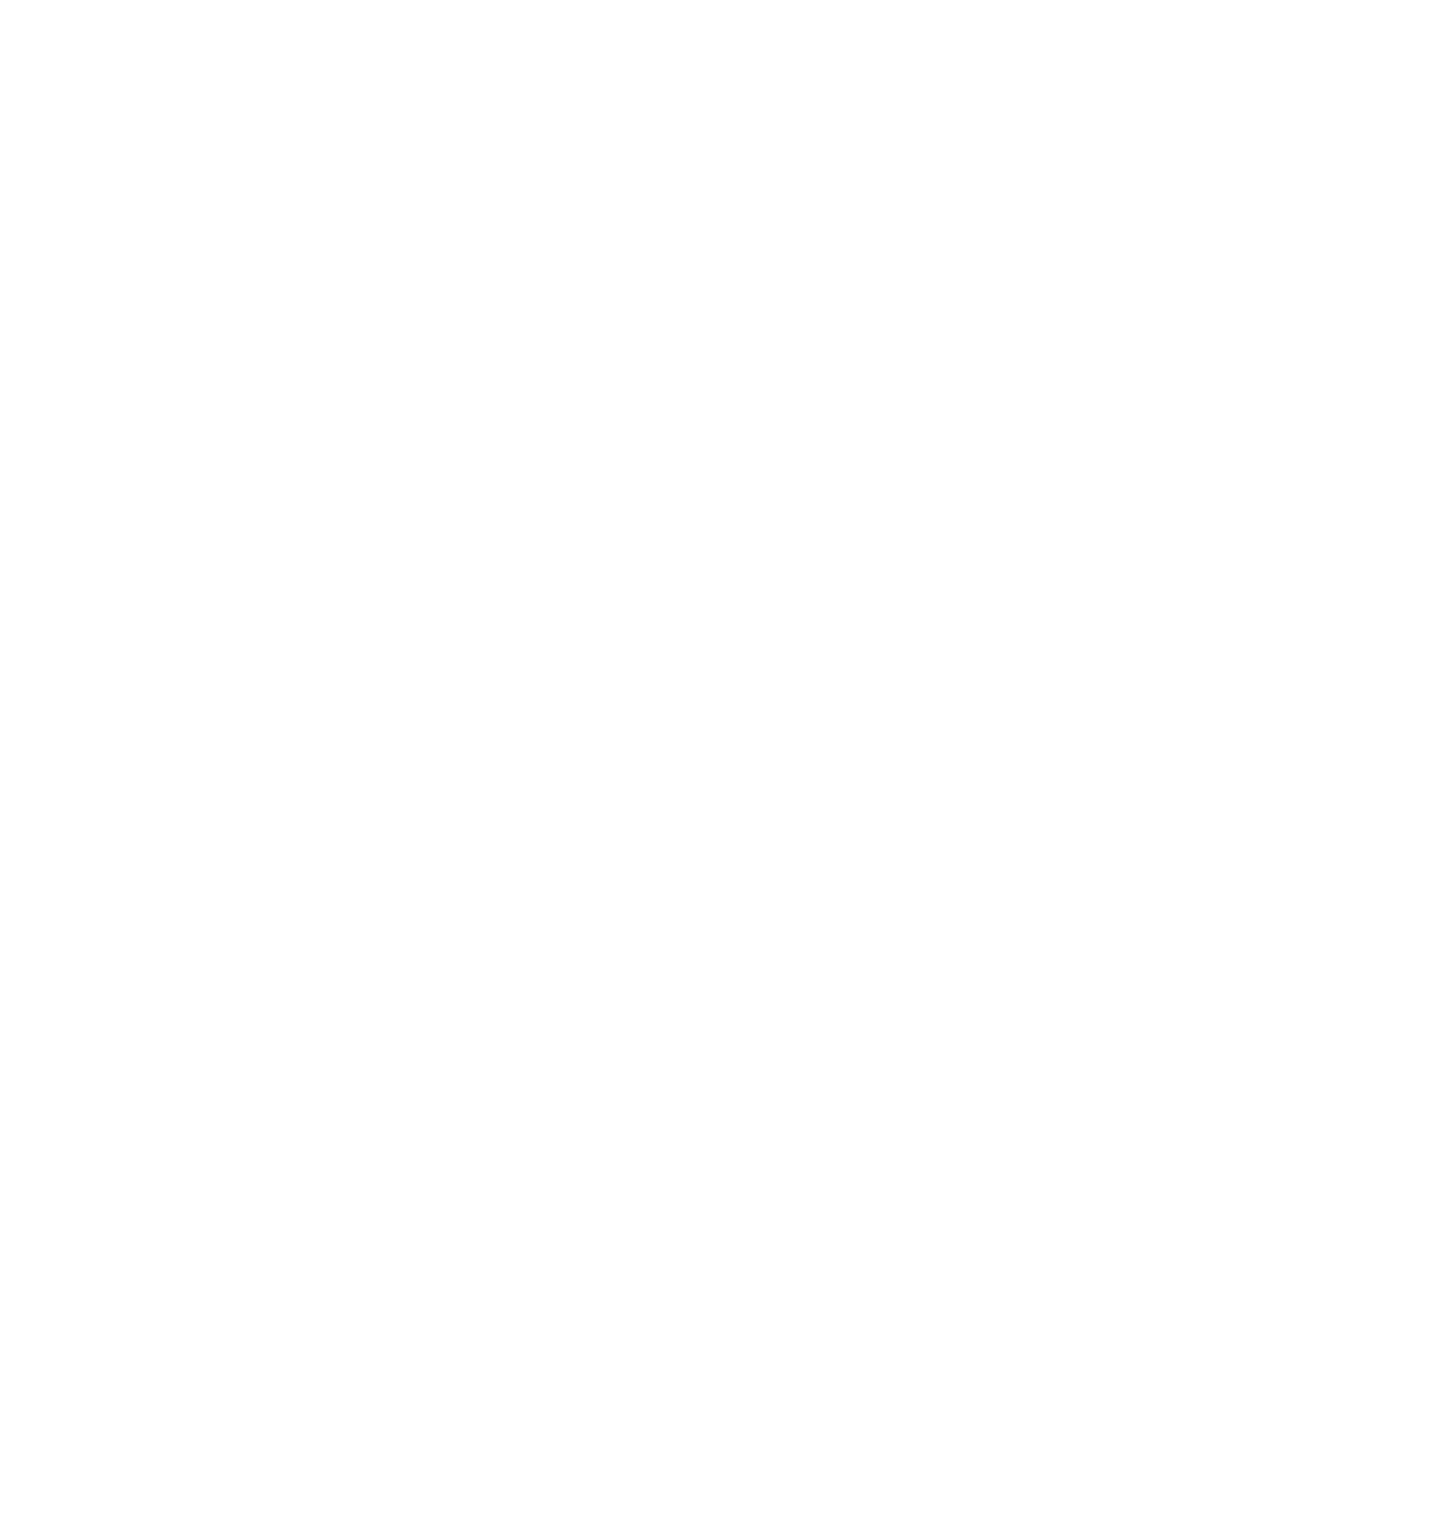 Saudi Cement Company logo for dark backgrounds (transparent PNG)